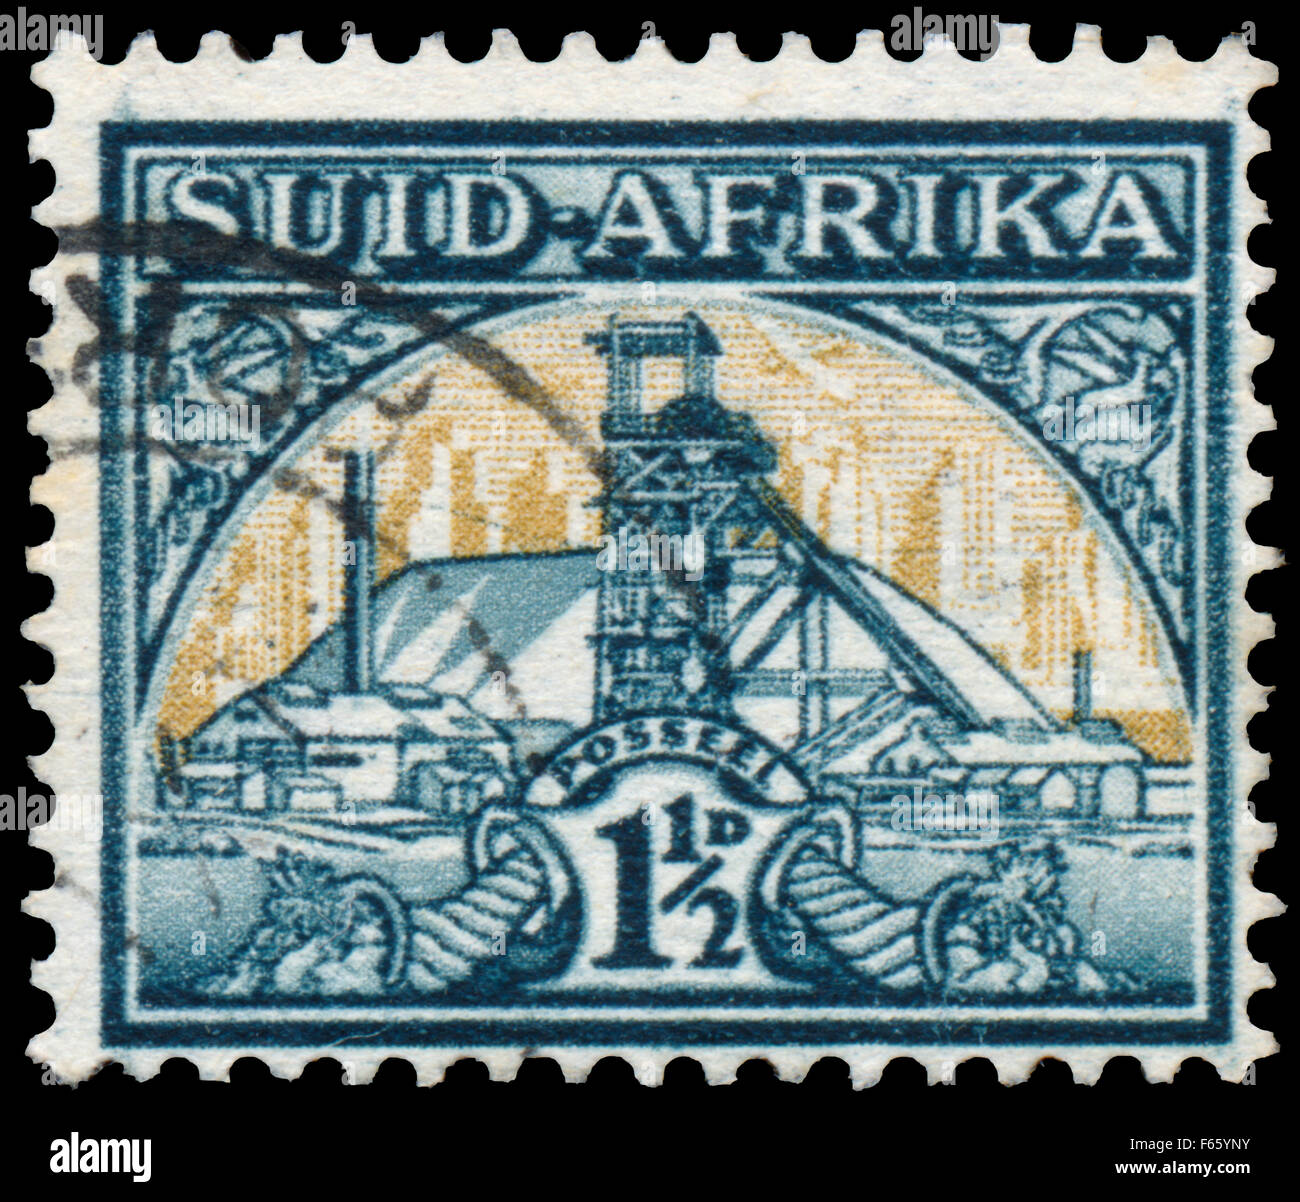 SOUTH AFRICA - CIRCA 1941: Stamp printed in South Africa shows Gold Mine Bilingual pair, circa 1941 Stock Photo